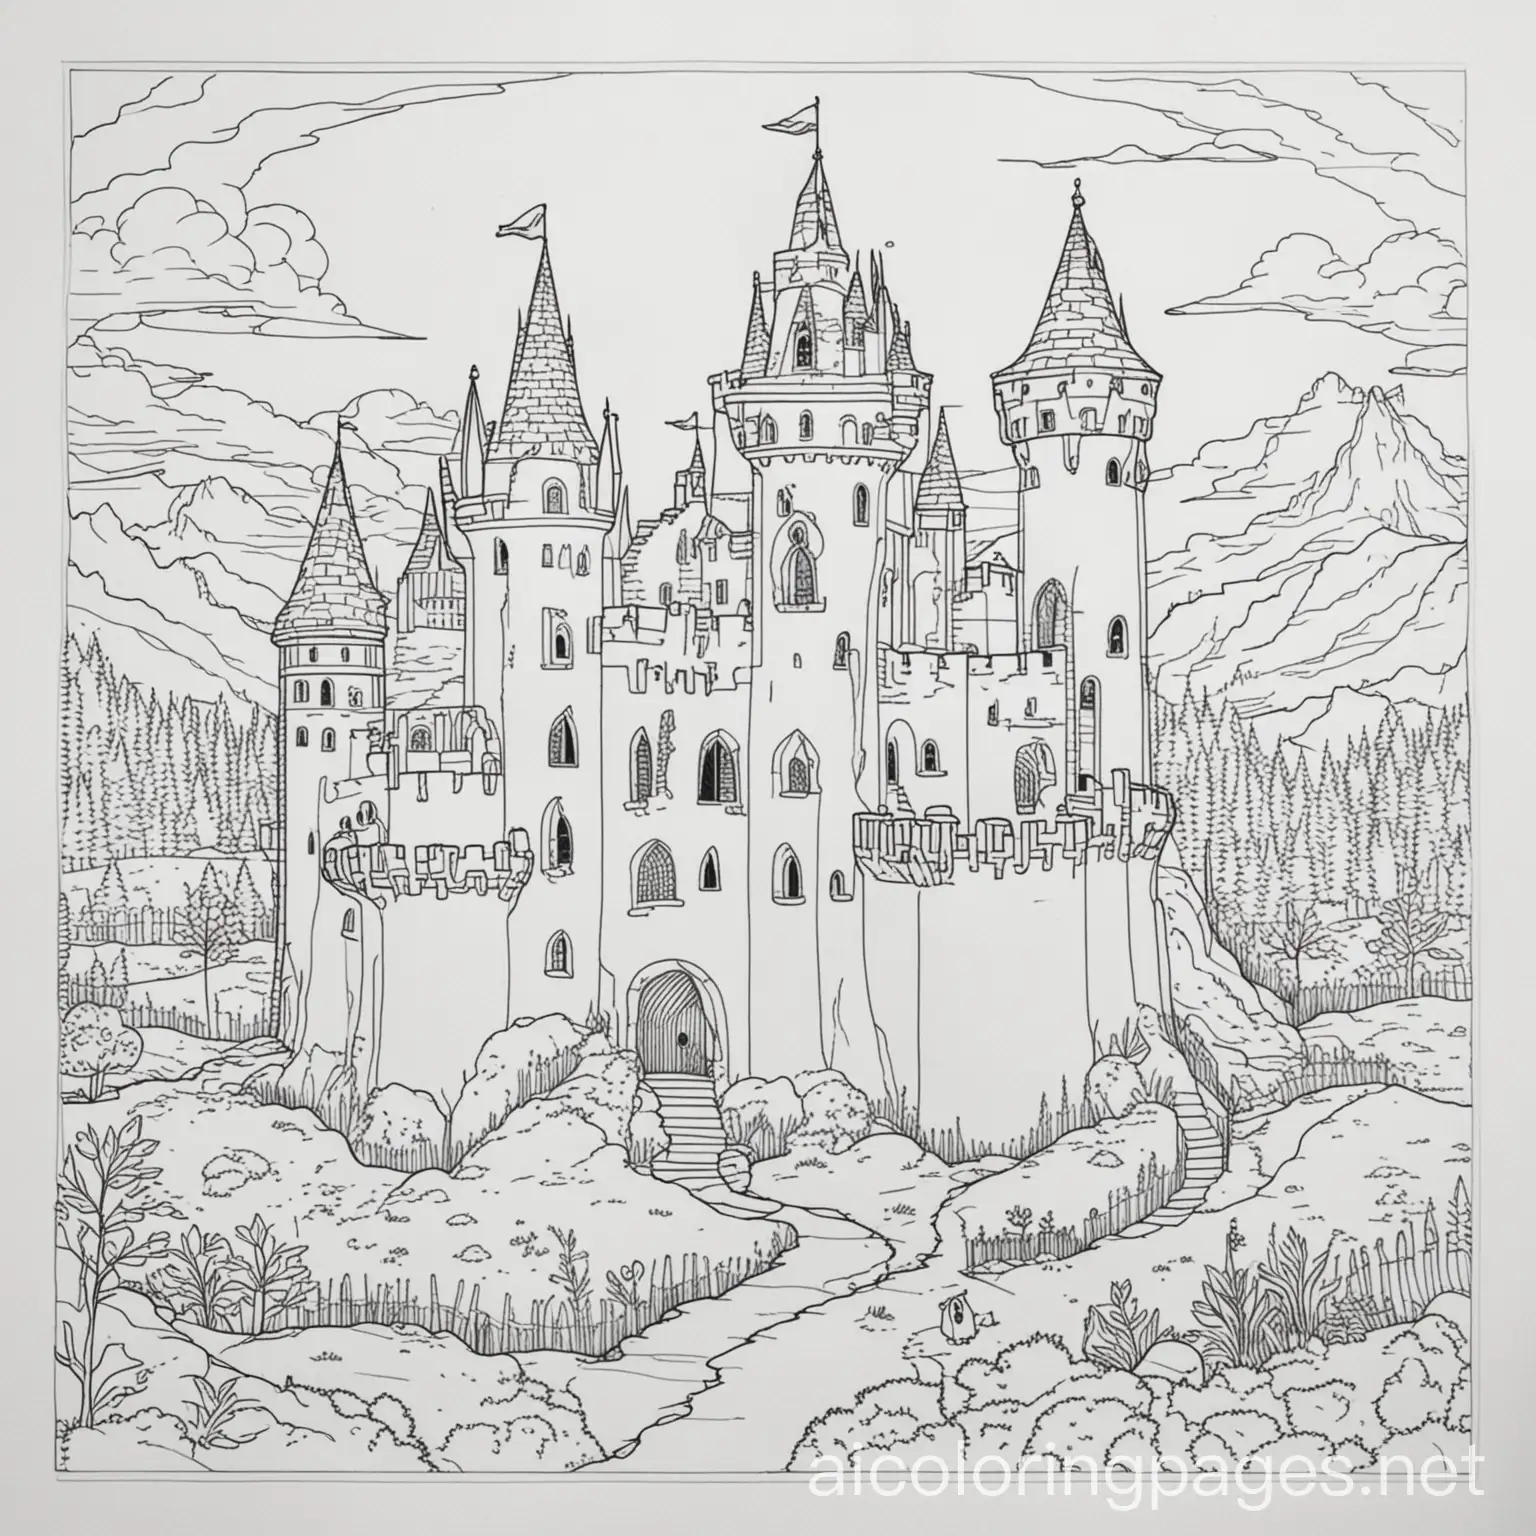 I spy castle, Coloring Page, black and white, line art, white background, Simplicity, Ample White Space. The background of the coloring page is plain white to make it easy for young children to color within the lines. The outlines of all the subjects are easy to distinguish, making it simple for kids to color without too much difficulty